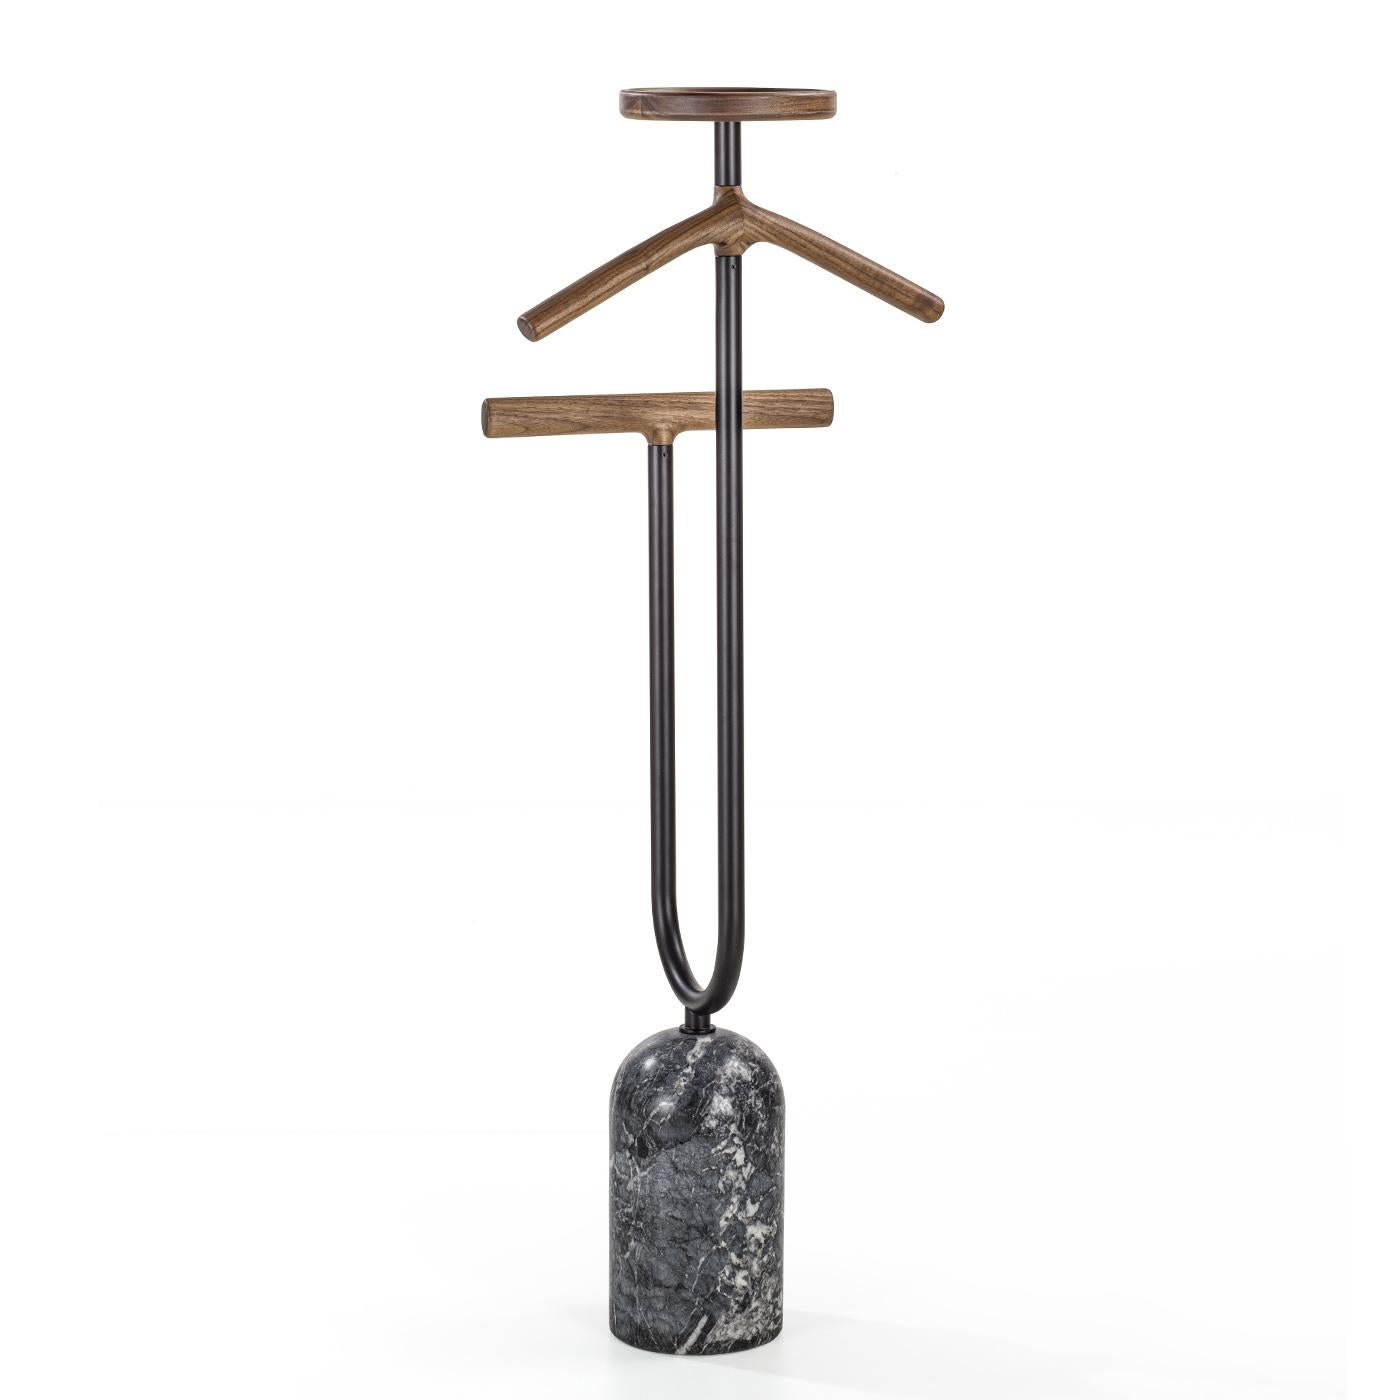 Valet Stelle with solid walnut wood top and
hanging rack parts. Trousers holder with non-
slip insert in grey microfiber and coin tray 
covered with genuine black leather. With Carnico 
dark grey marble base with black matte metal rod.
Also